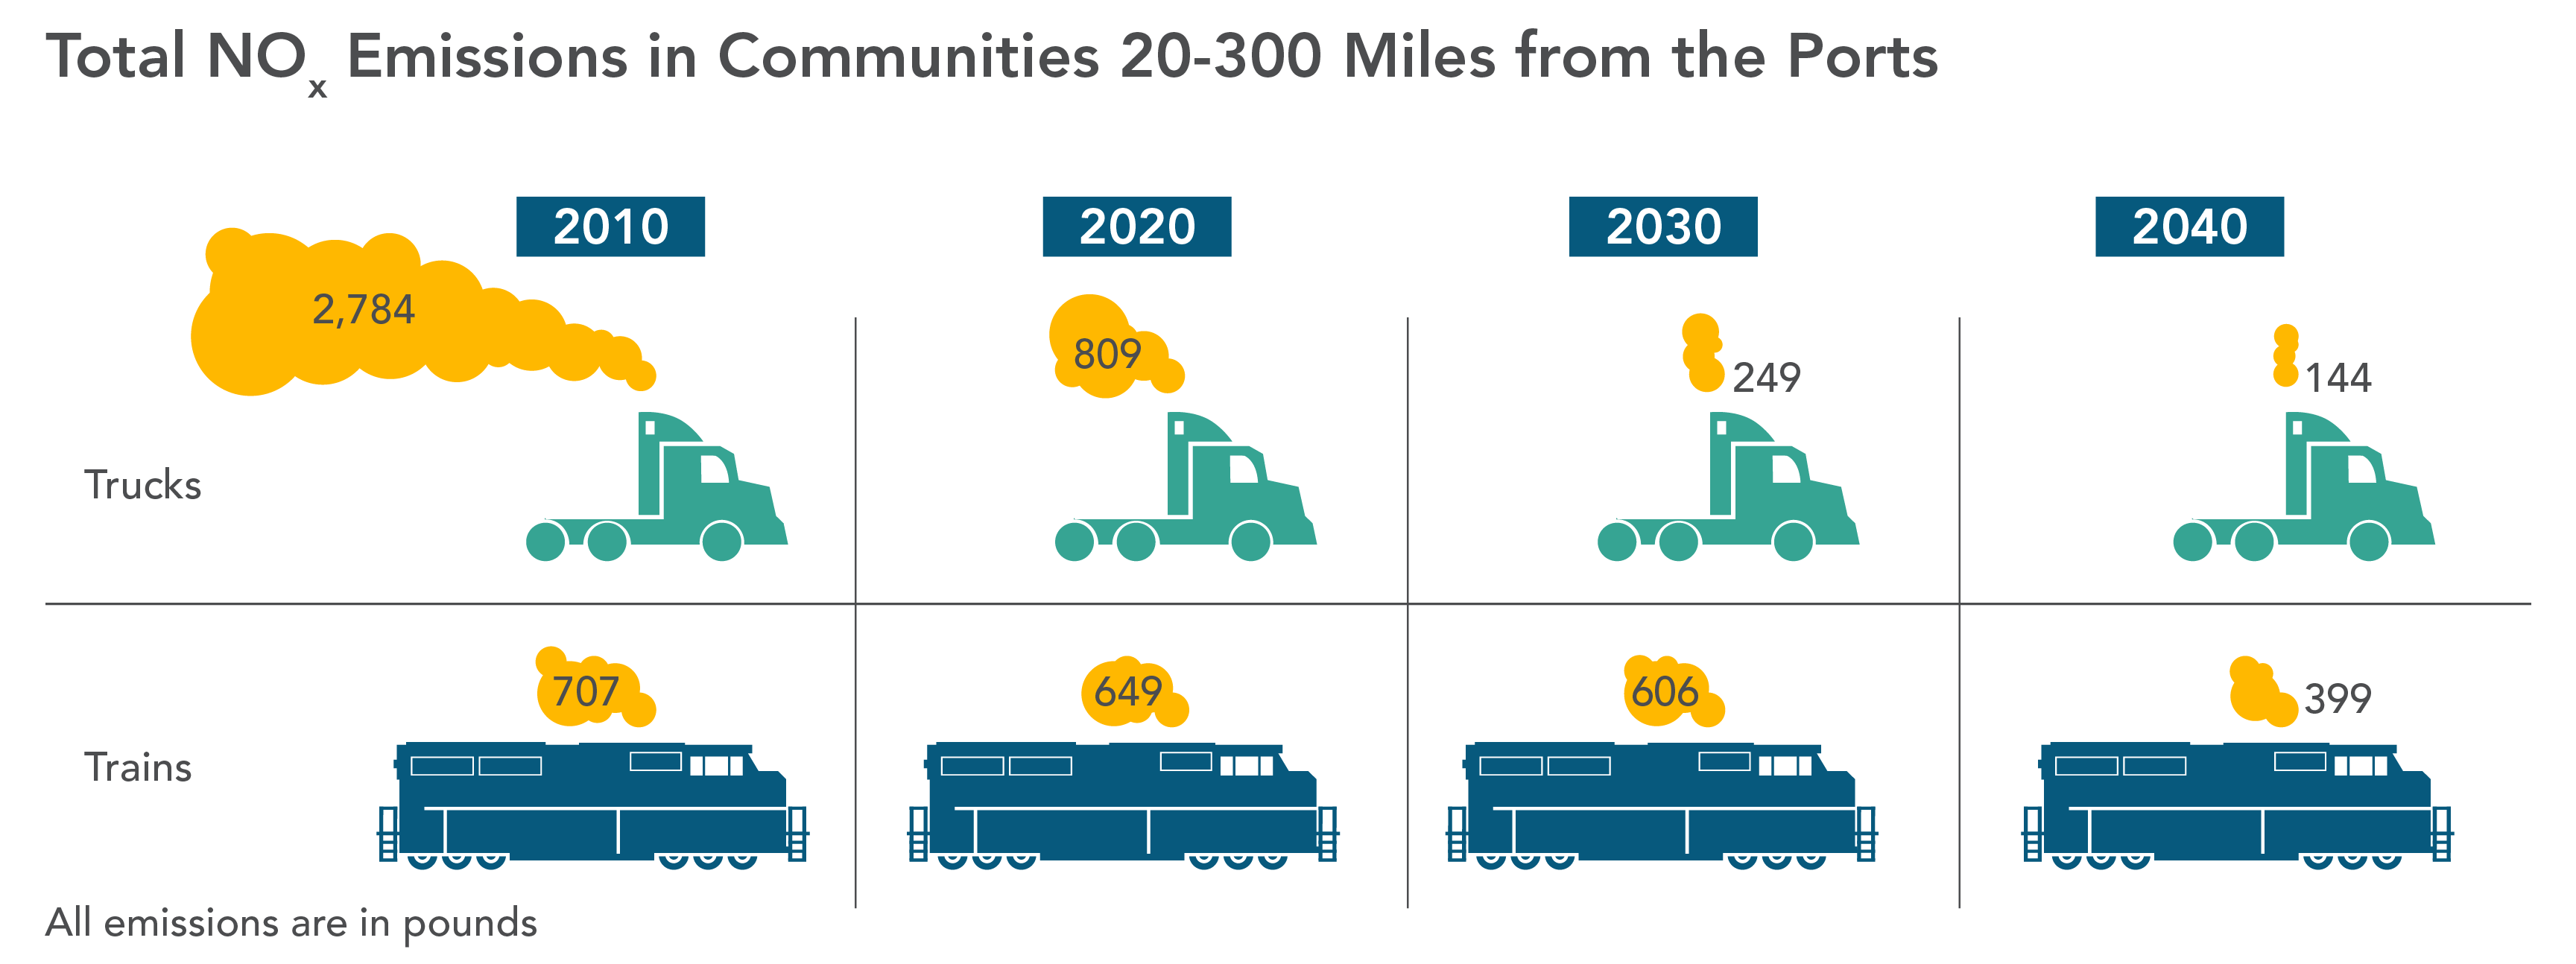 Comparison of truck and train Nox emissions in communities 20 to 300 miles from the ports.  Trucks emit less Nox than trains by 2030.